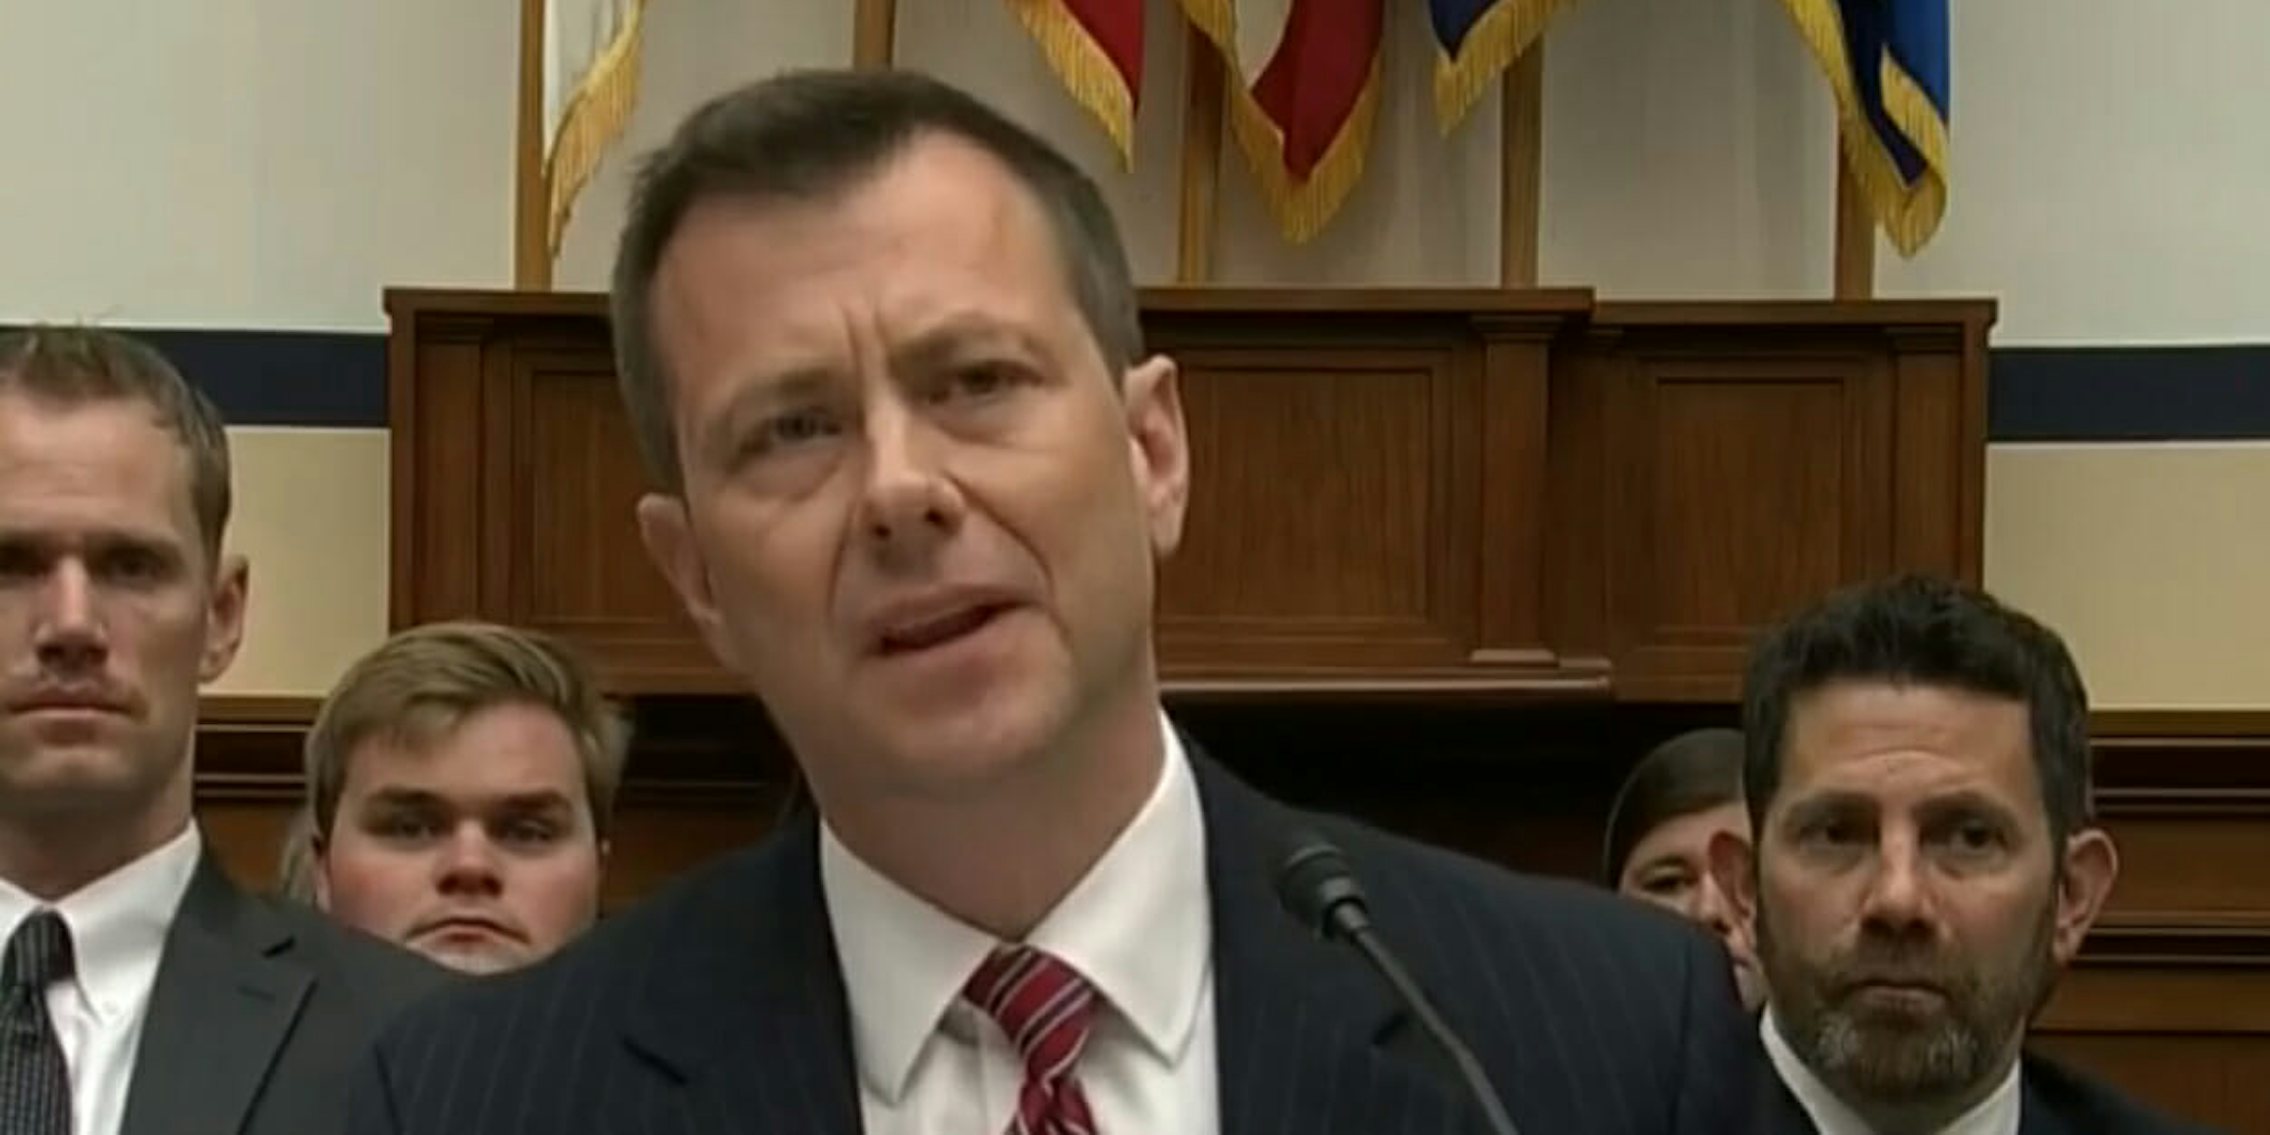 A GoFundMe was set up to help pay for the 'considerable legal bills' for recently-fired FBI agent Peter Strzok a frequent target of President Donald Trump.